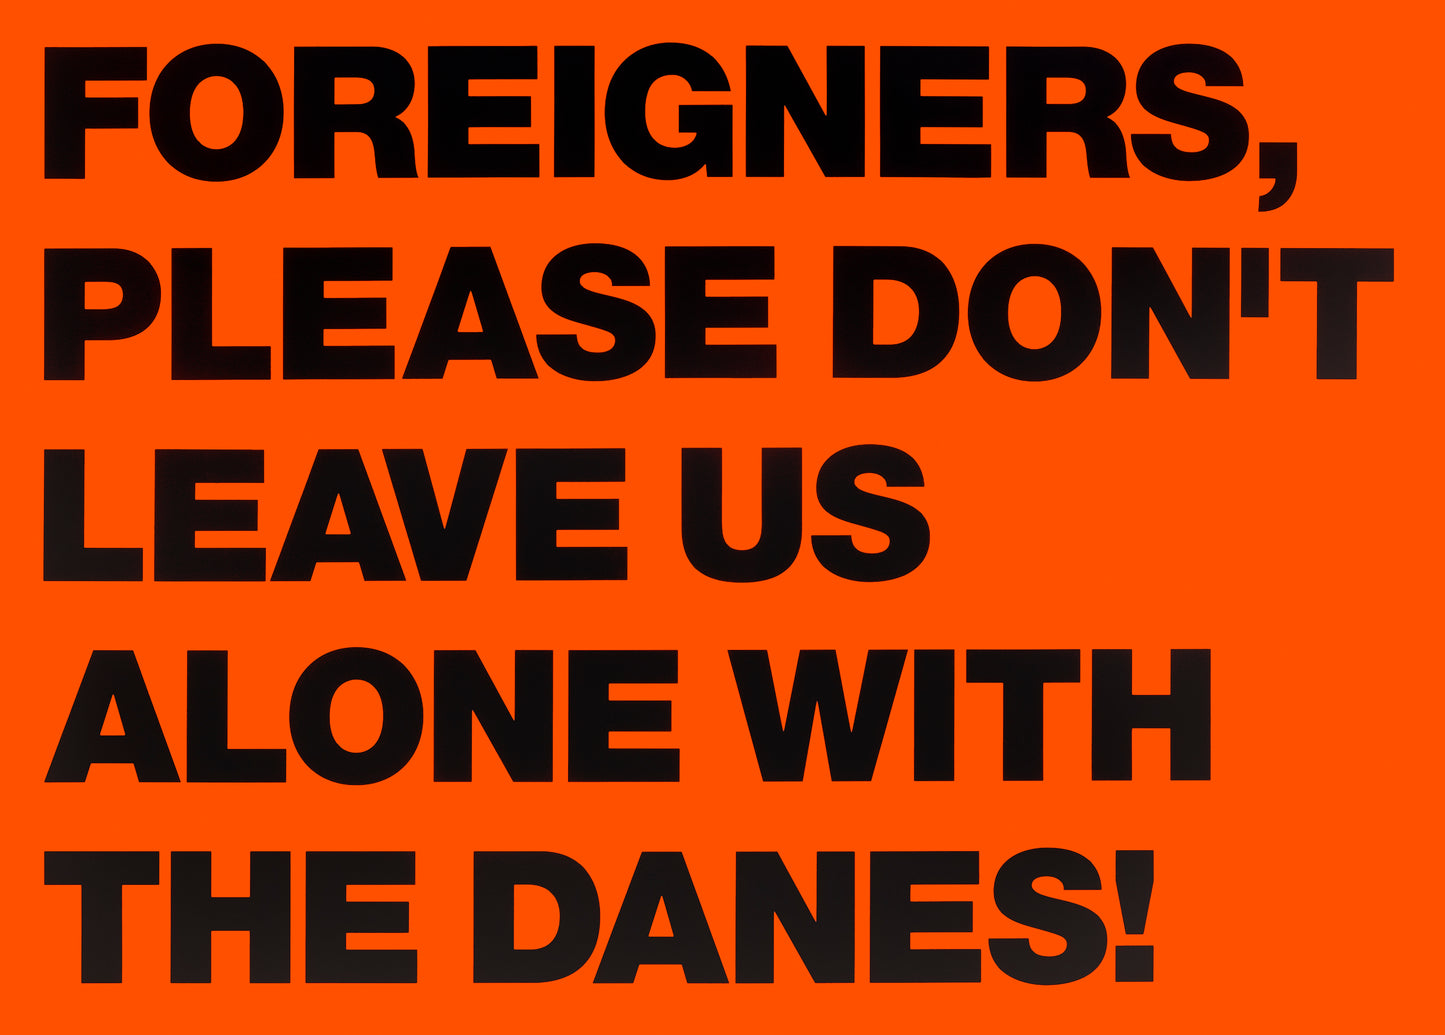 Foreigners, Please Don't Leave Us Alone With The Danes!